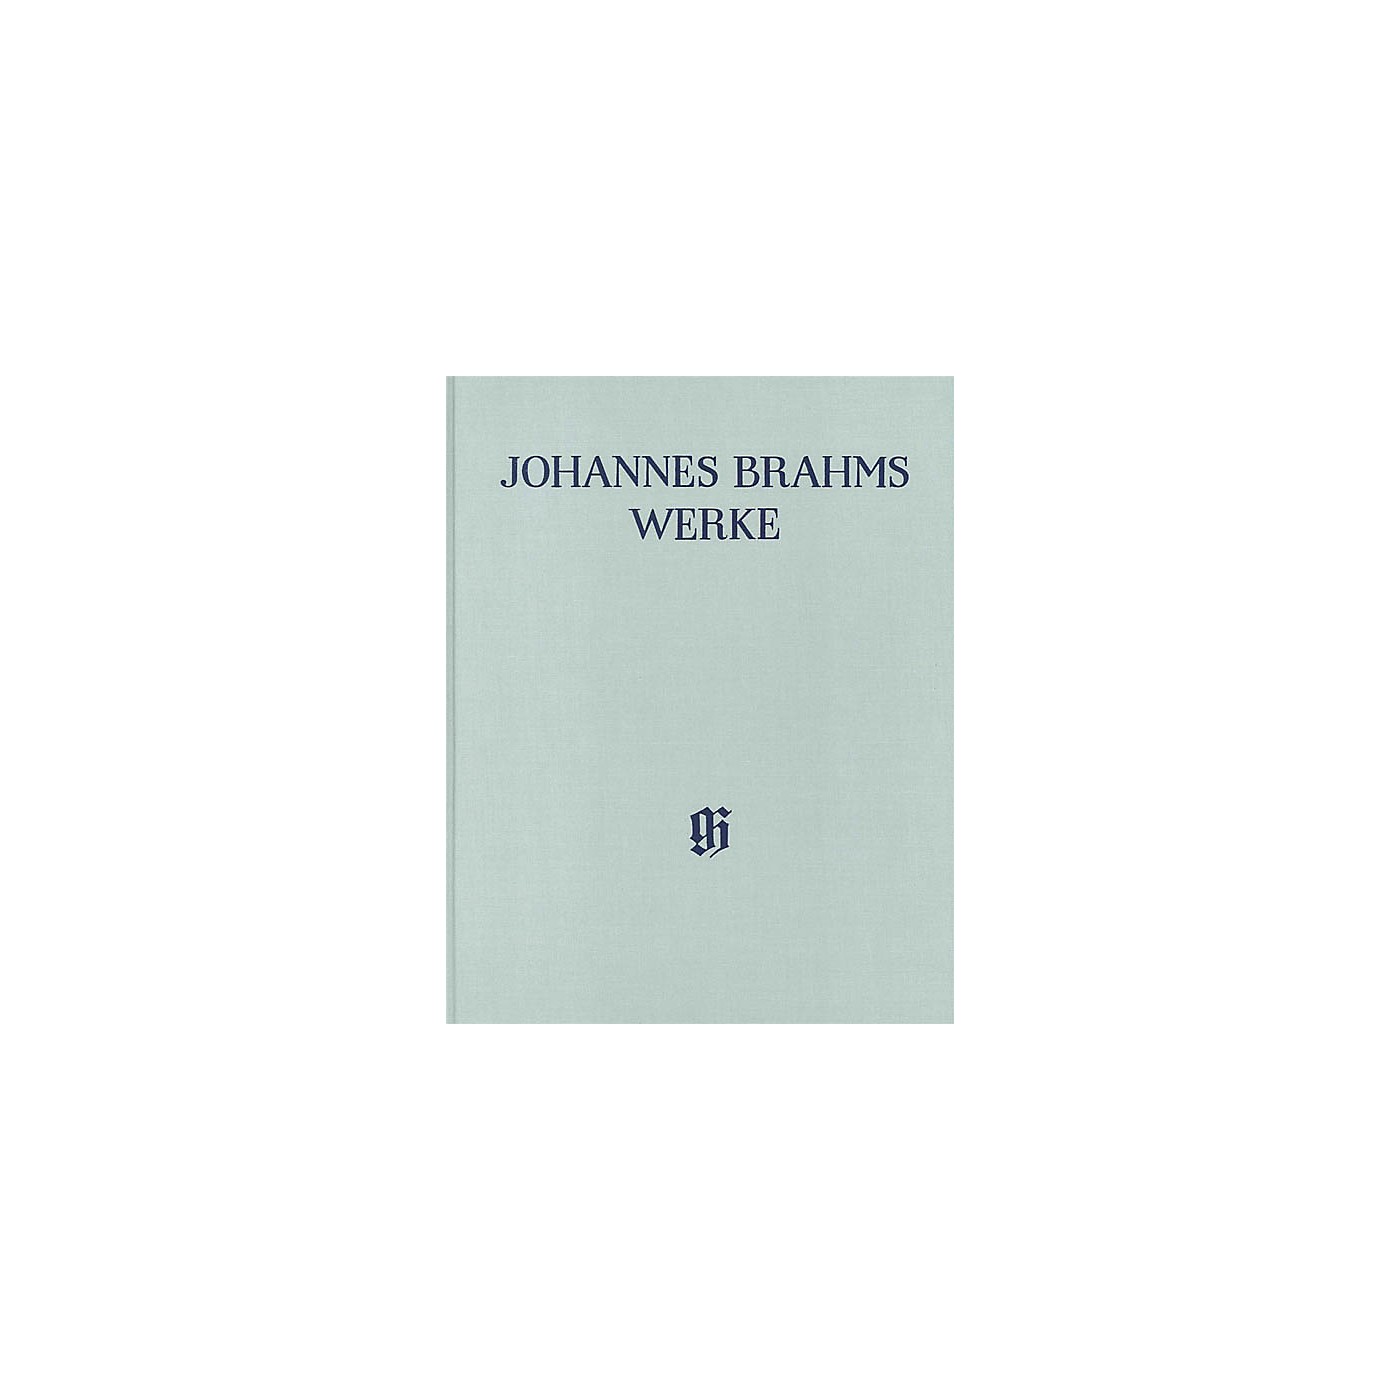 G. Henle Verlag Symphony No. 3 in F Major, Op. 90 Henle Edition Hardcover by Johannes Brahms Edited by Robert Pascall thumbnail